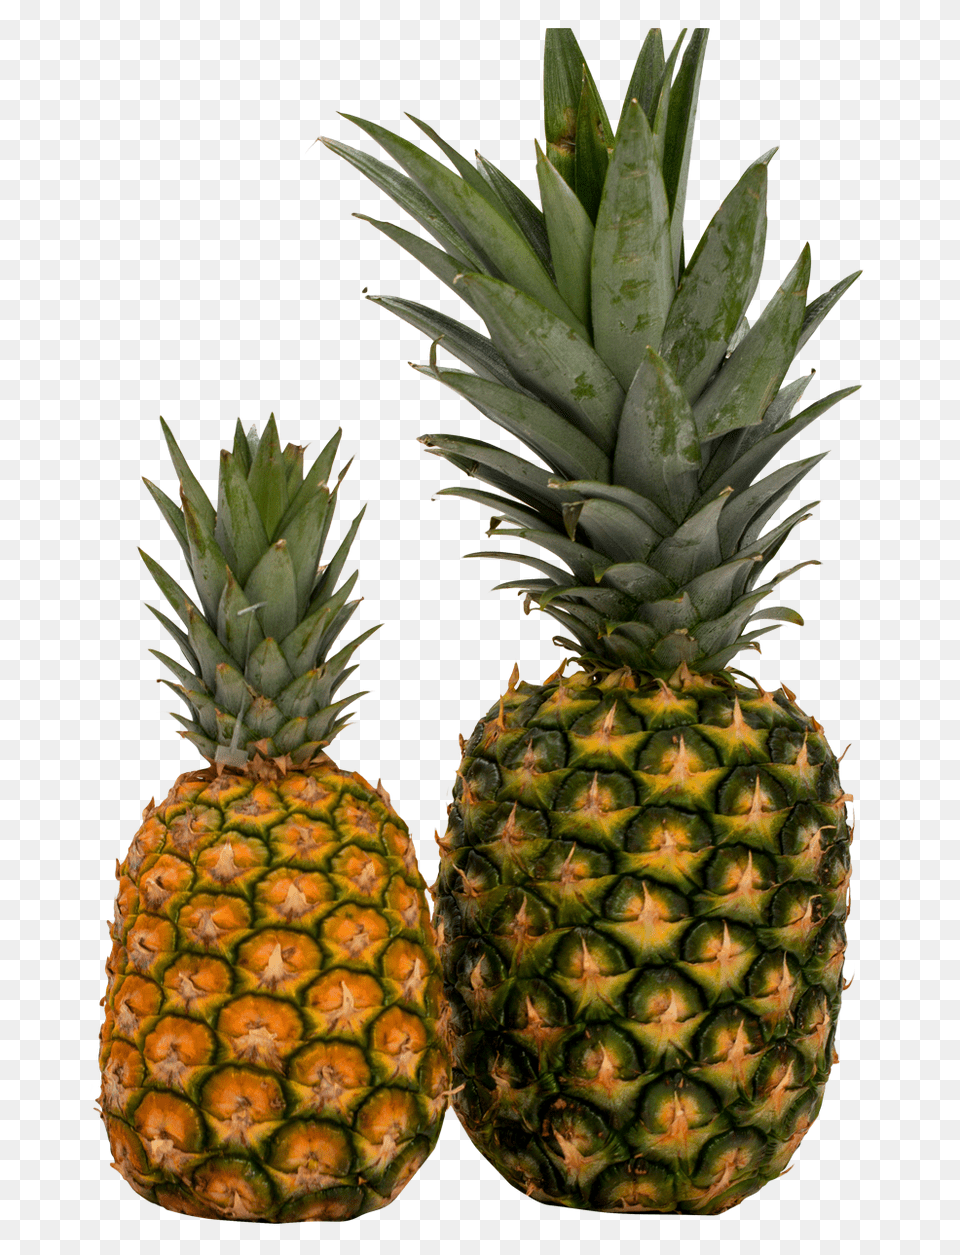 Pineapple 1, Food, Fruit, Plant, Produce Png Image